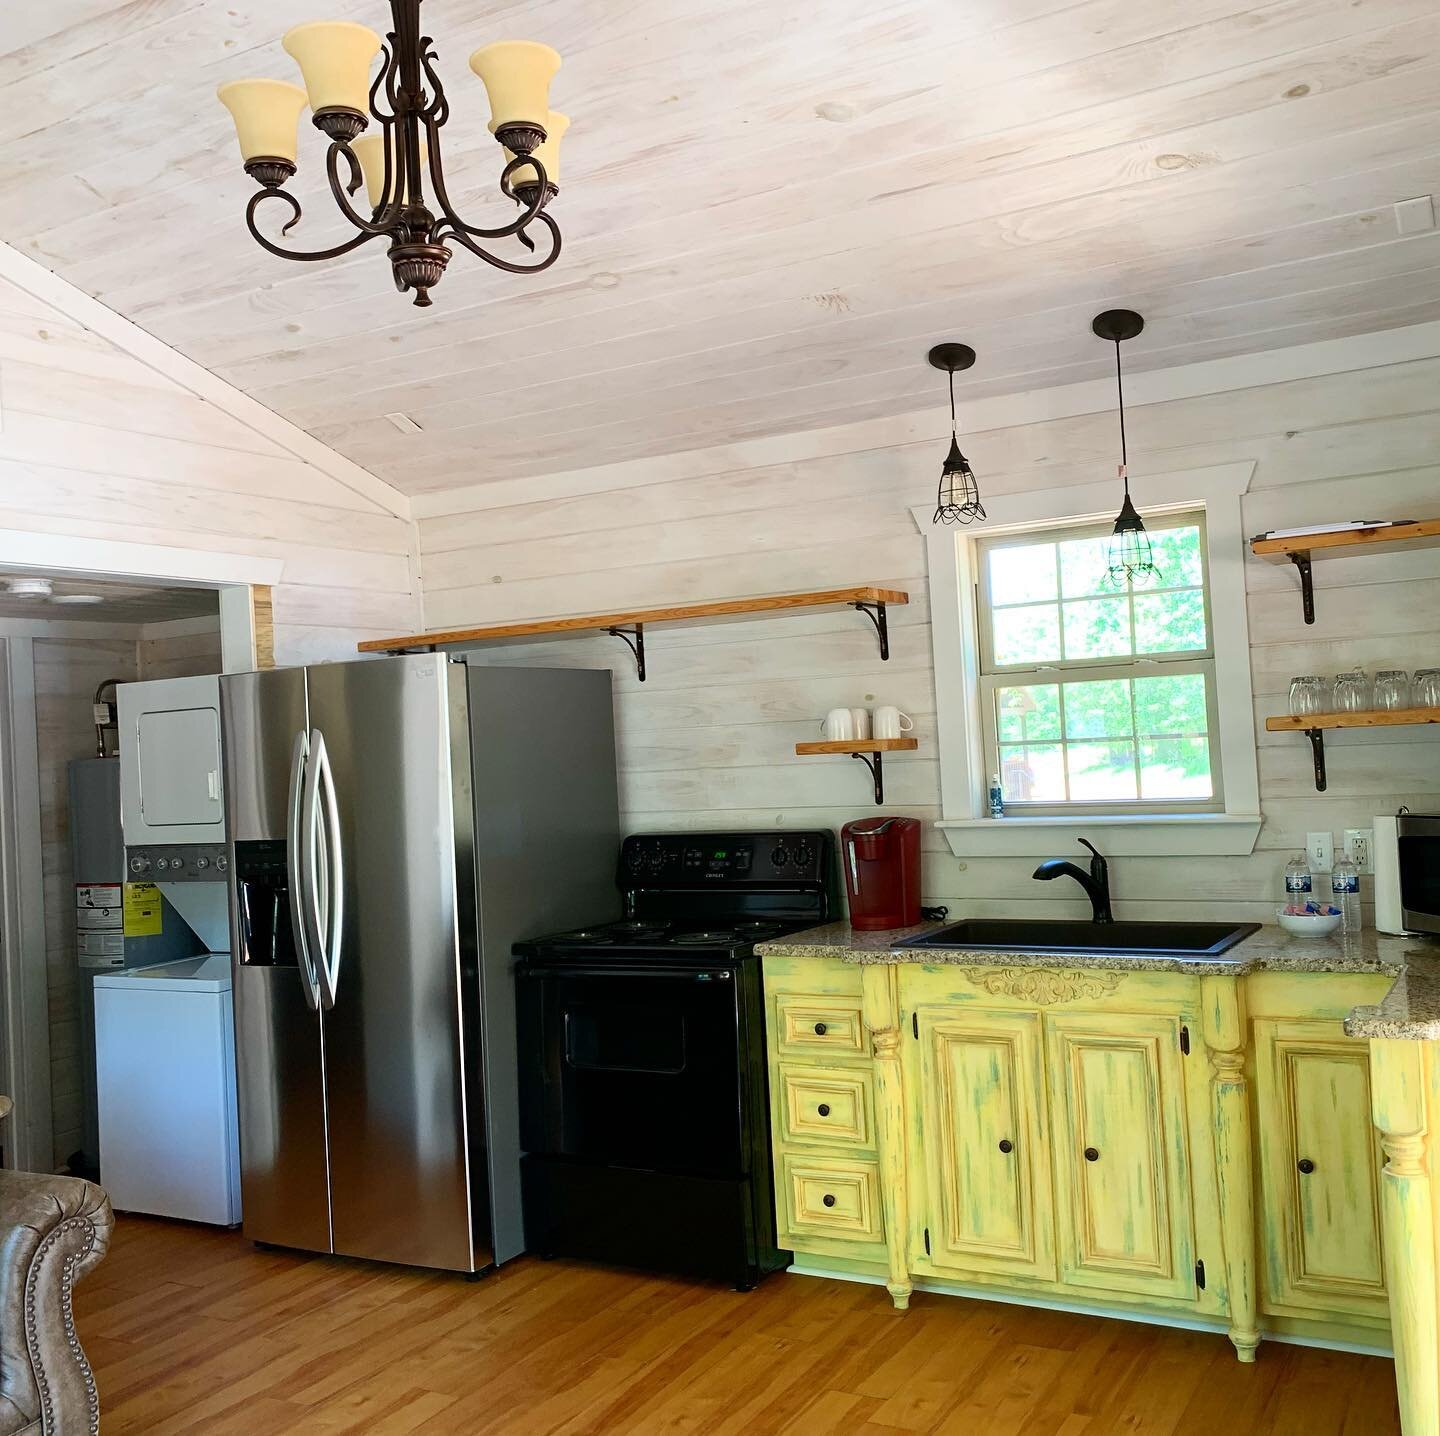 It&rsquo;s your lucky day!! BE SPONTANEOUS &amp; take advantage of a recent cancellation. Cabin 5 is available NOW! Surprise someone with a getaway, an anniversary trip, birthday celebration, off-roading weekend, or a Netflix &amp; chill recharge. We